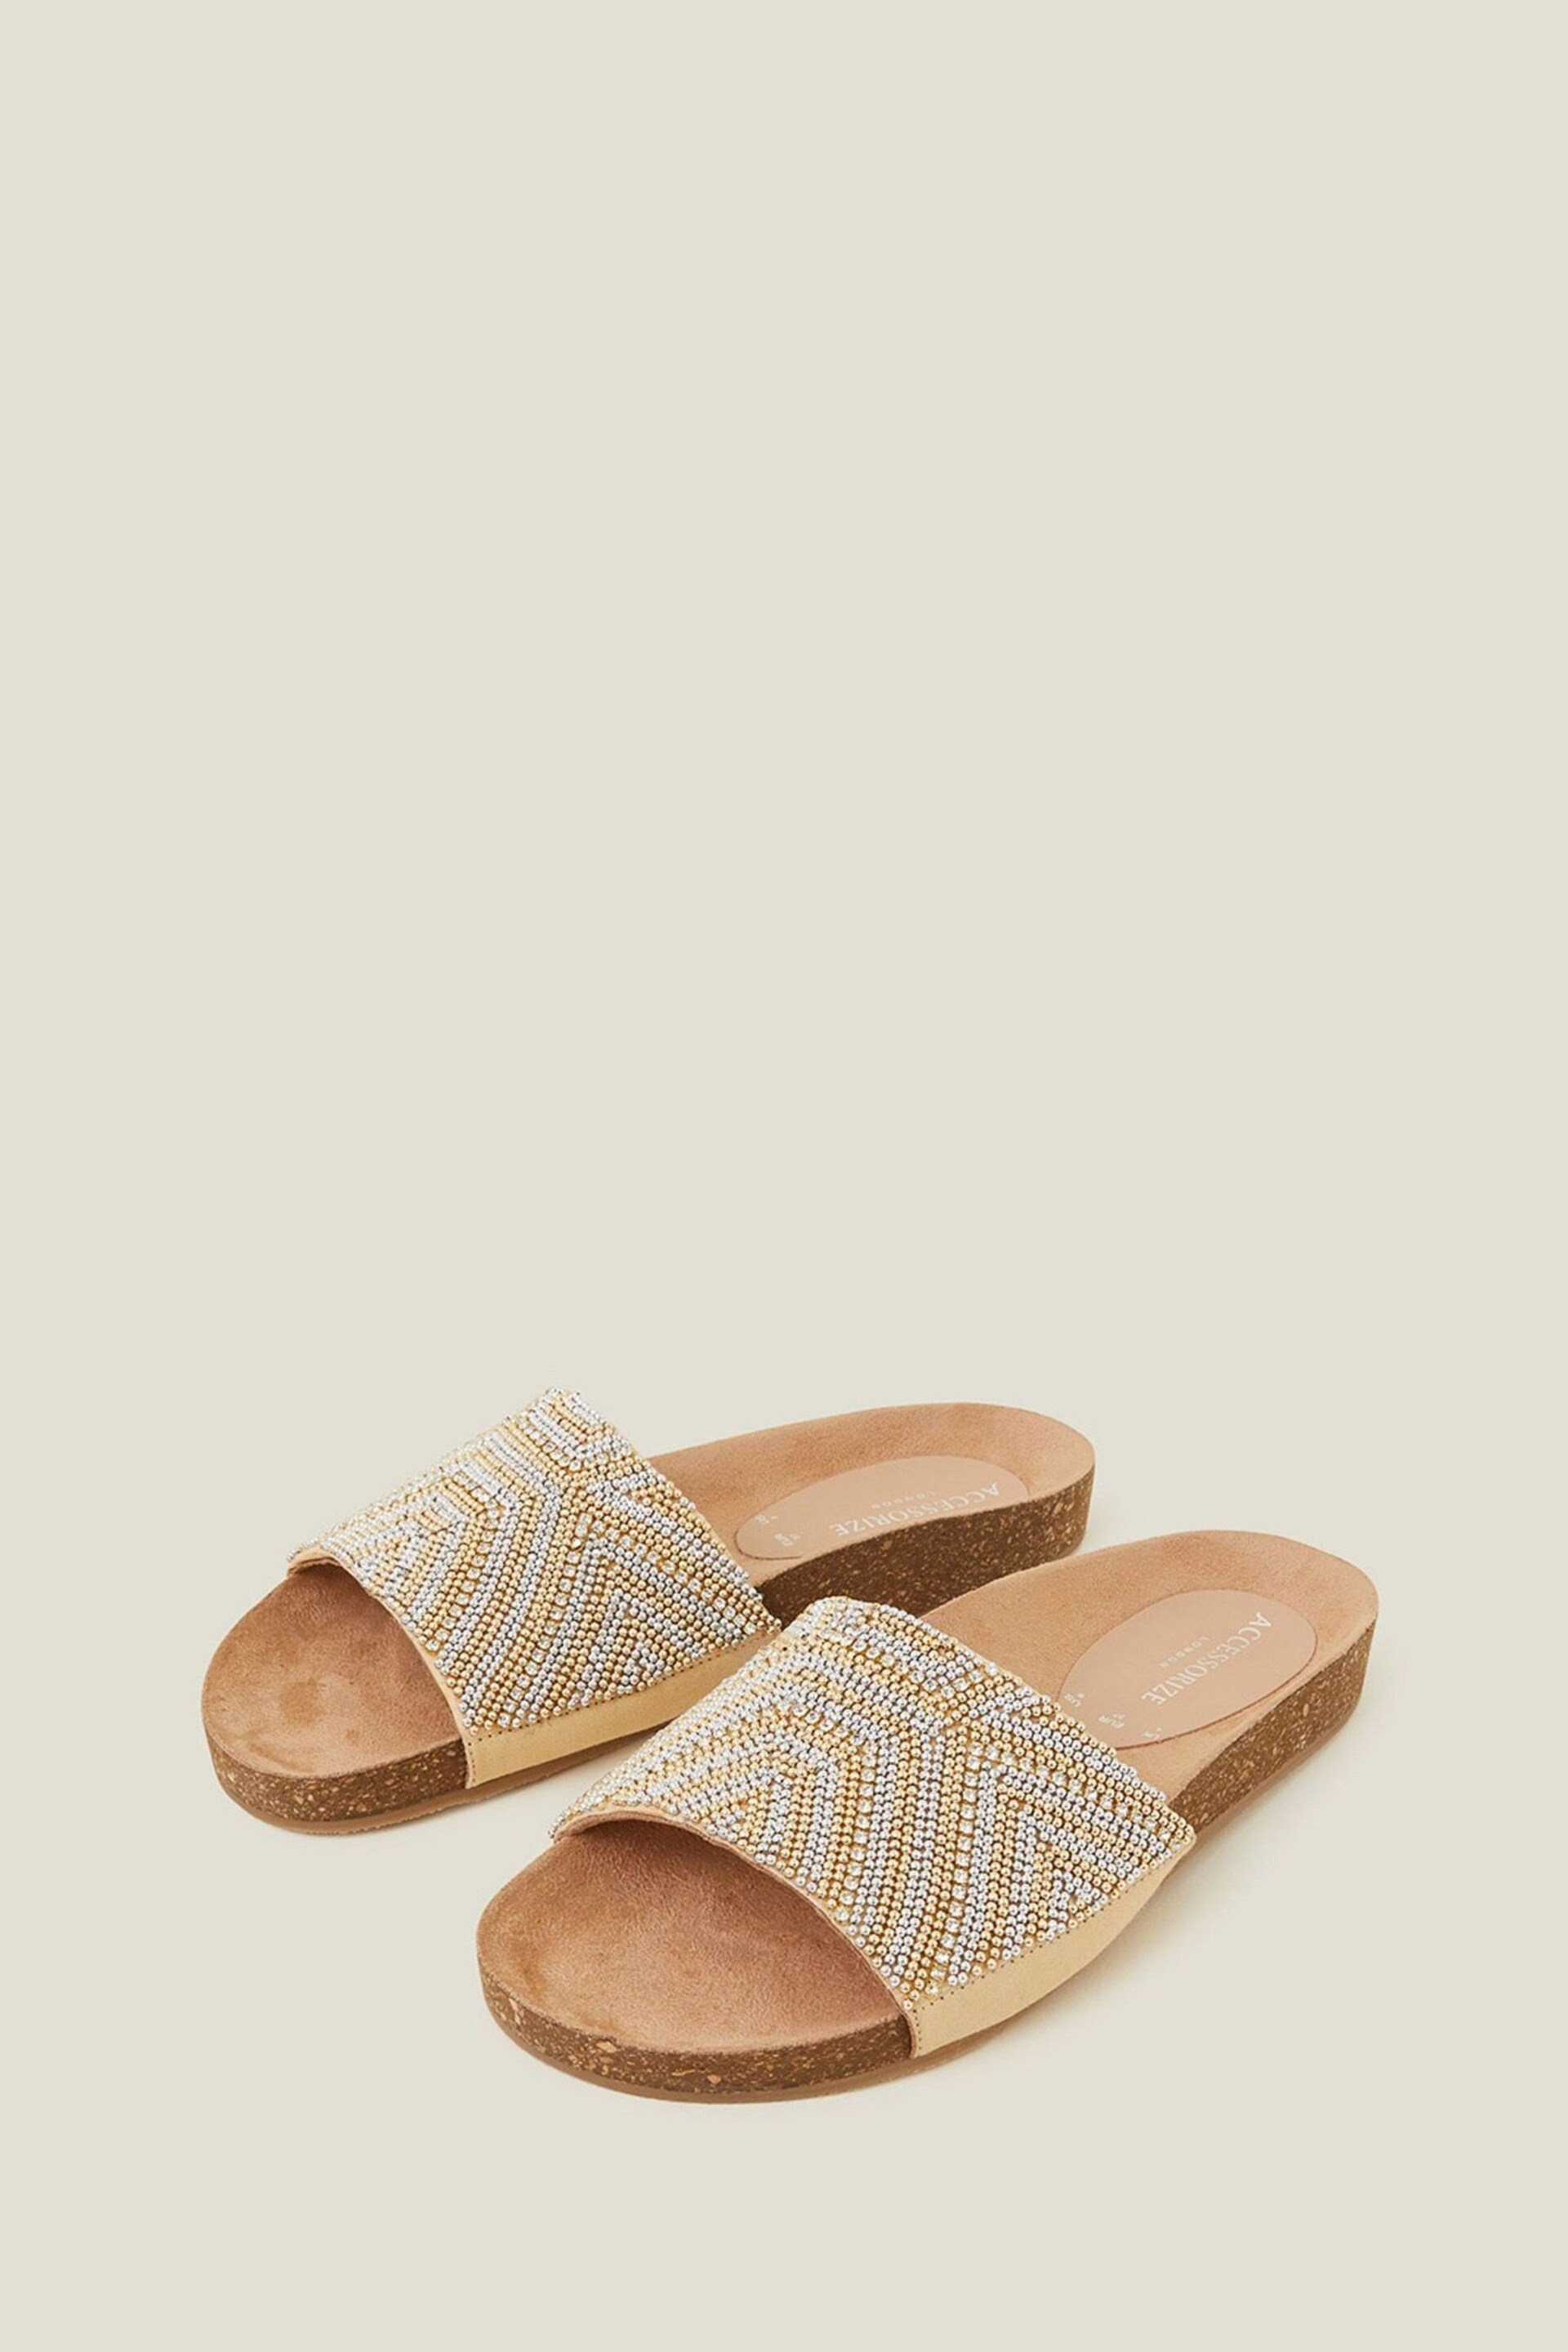 Accessorize Gold Beaded Sparkle Sliders - Image 1 of 3